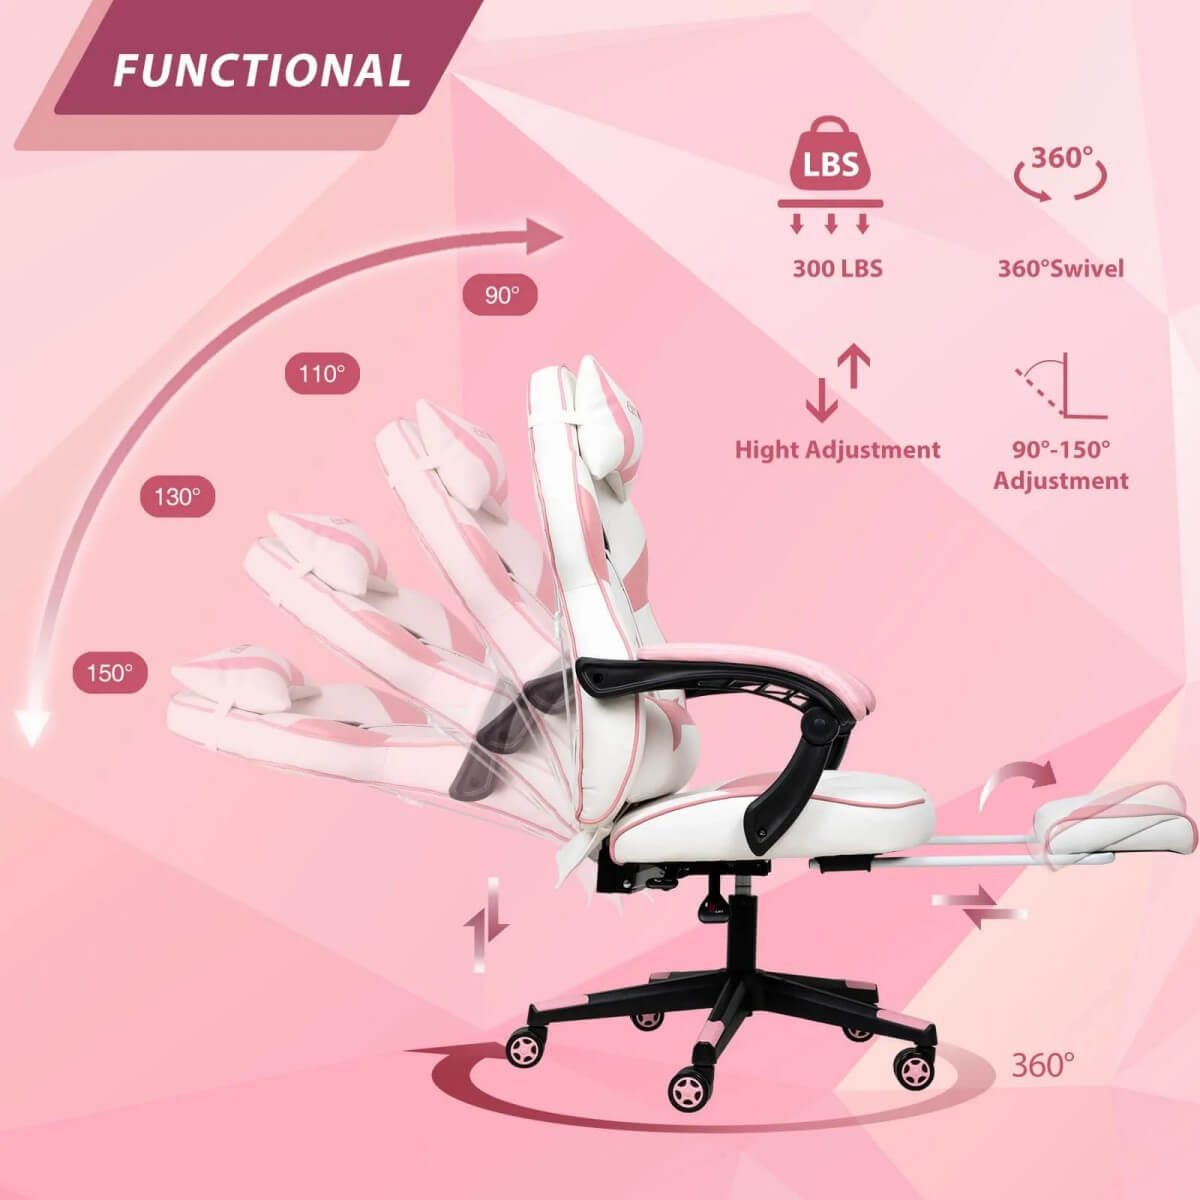 Elecwish Video Game Chairs Pink Gaming Chair With Footrest OC087 is functional